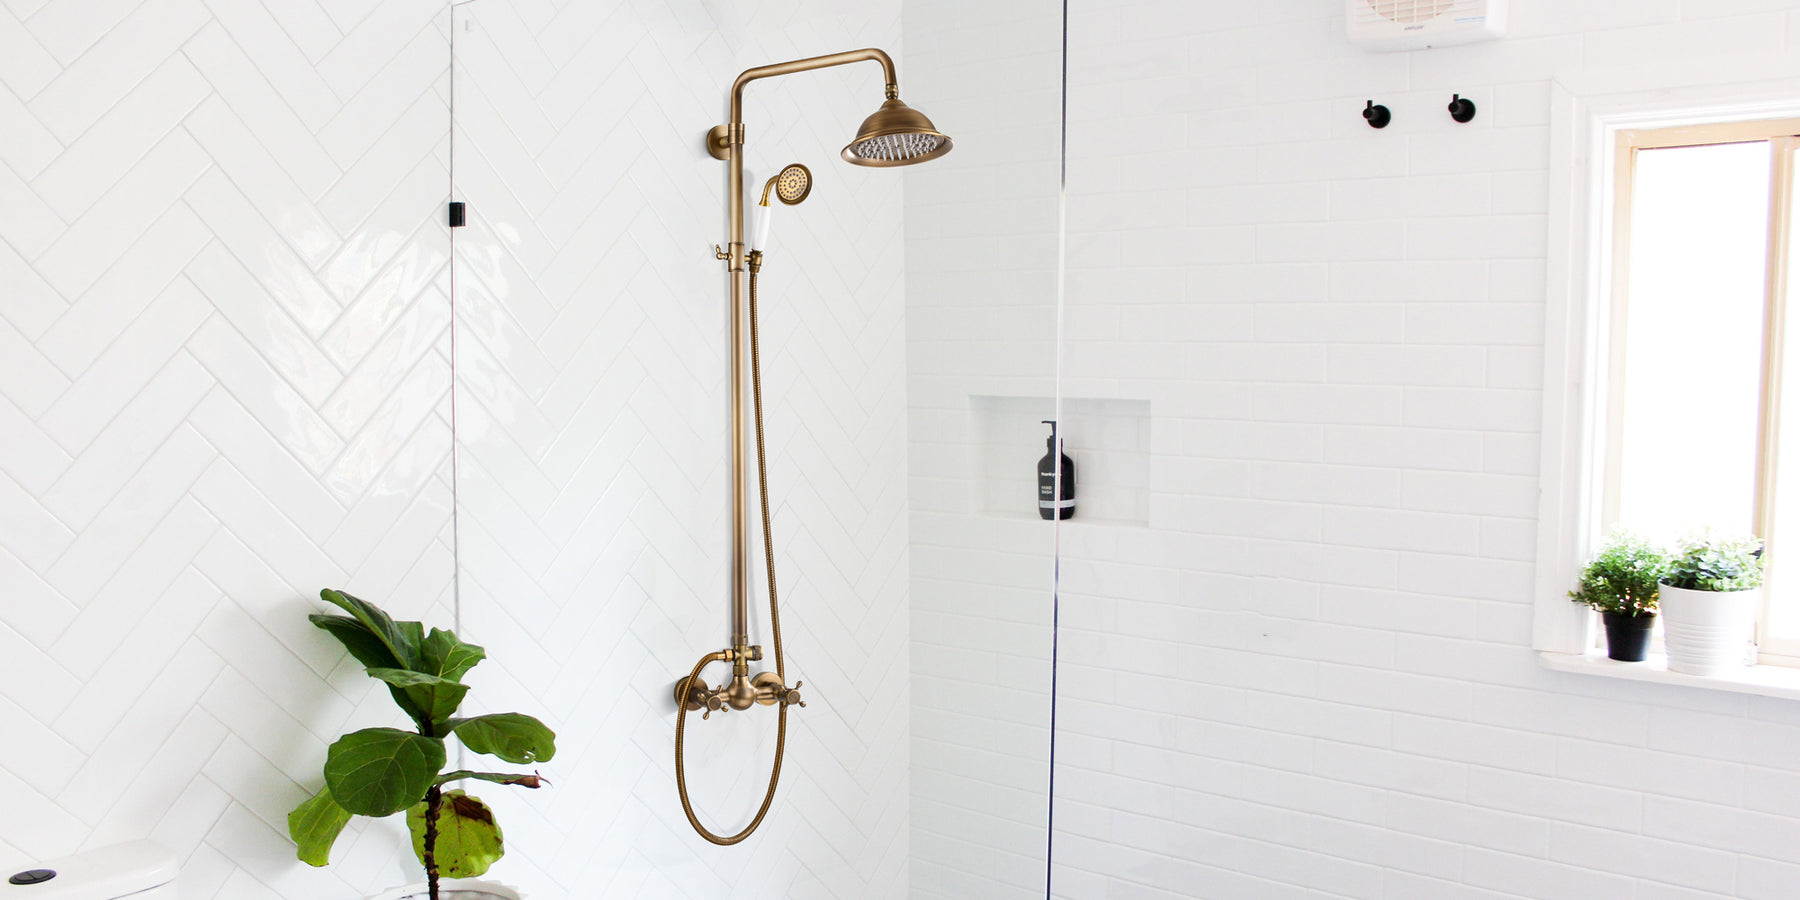 Antique Brass Shower System 8 Inch Rainfall Shower Head Handheld Spray Double Cross Handle Bathroom Shower Faucet Wall Mount